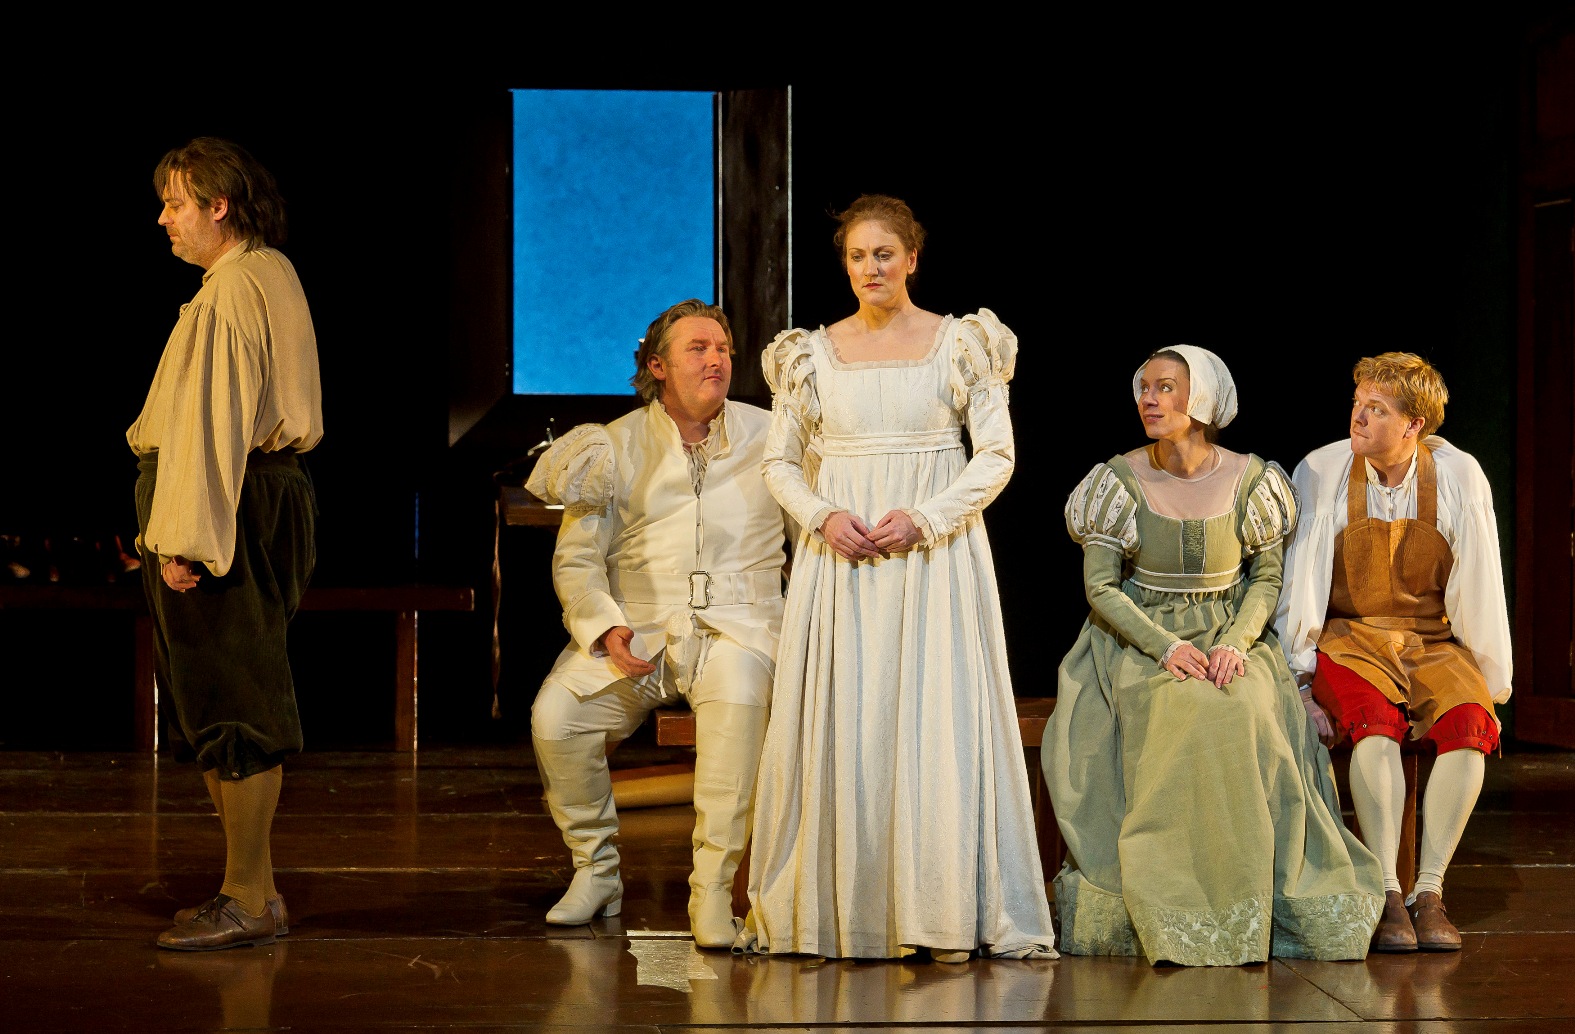 The Act III Quintet of Die Meistersinger at the Royal Opera